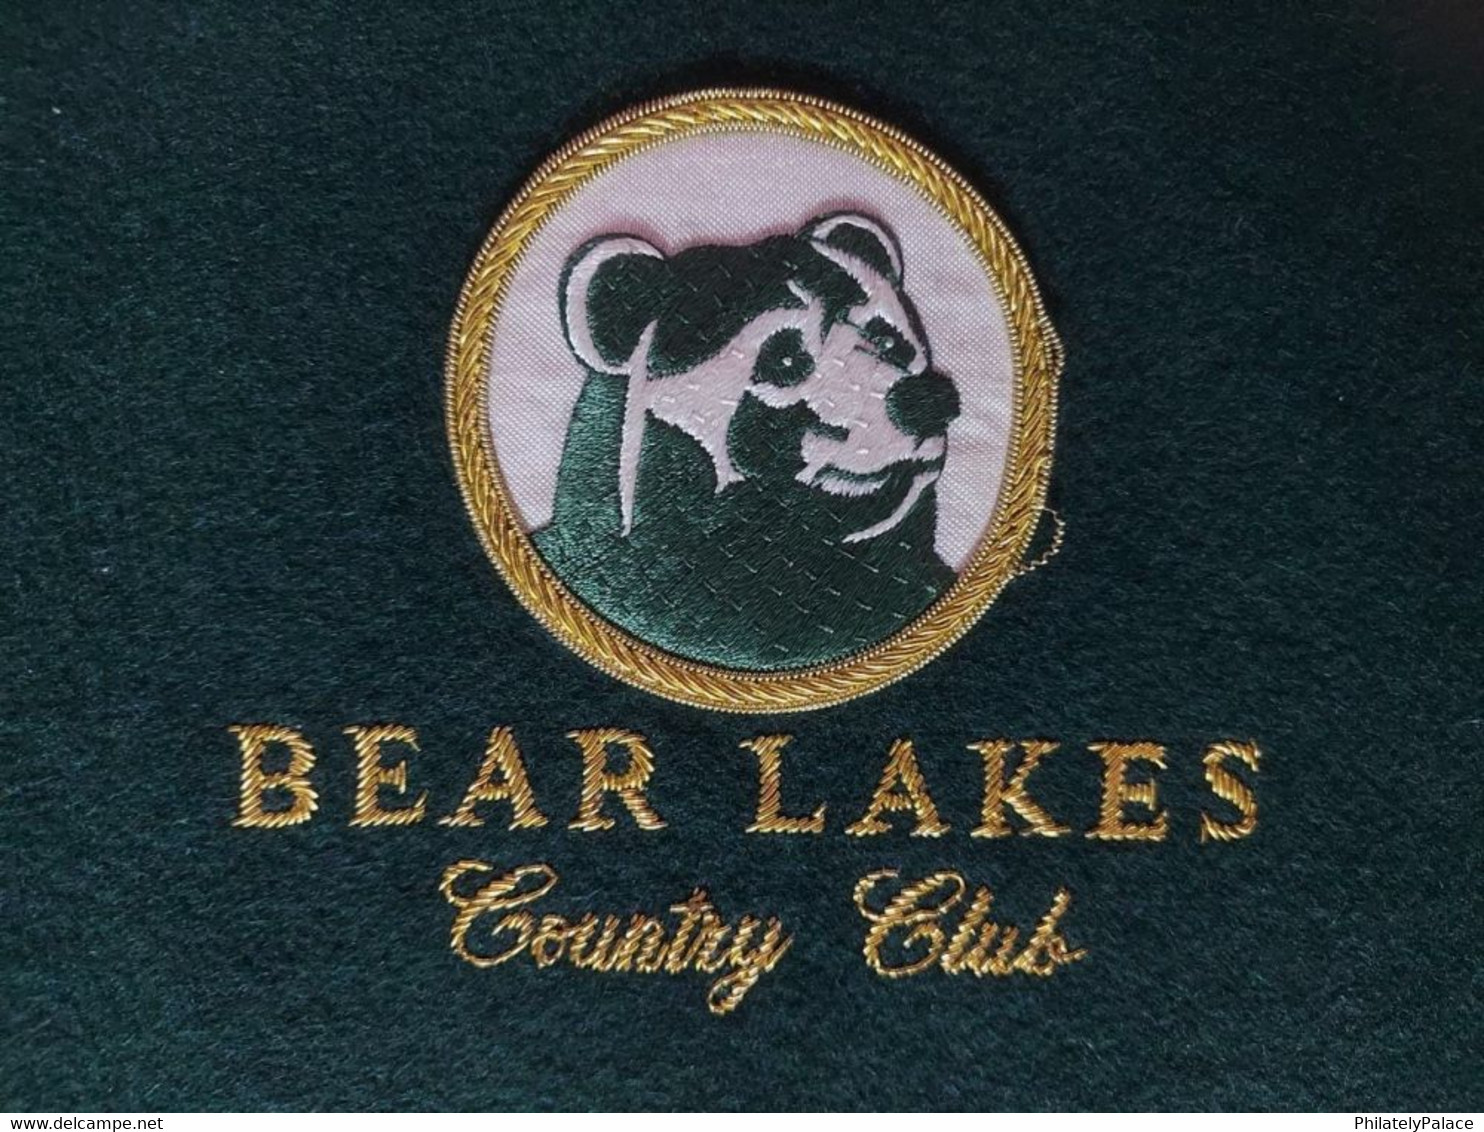 Bear Lakes County Club Related To Golf Sports, Blazer Pocket Badge (**) - Kleding, Souvenirs & Andere